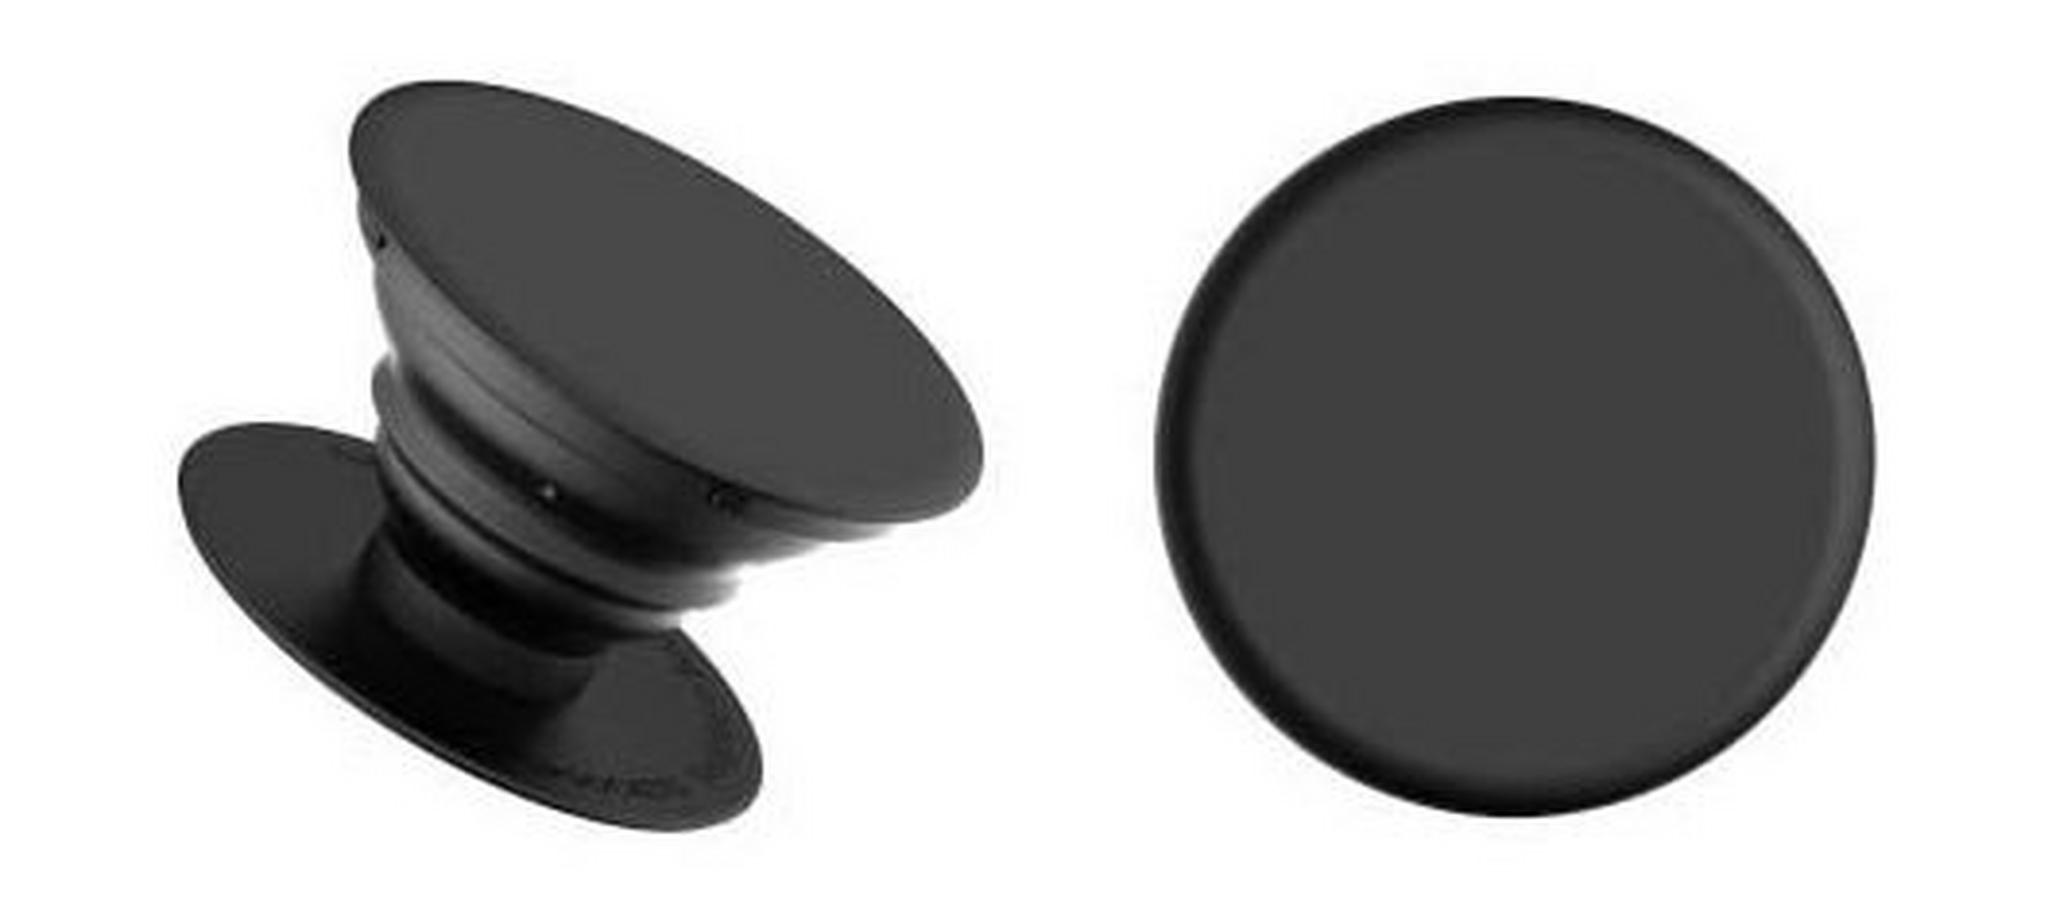 Popsockets Phone Stand and Grip - Black